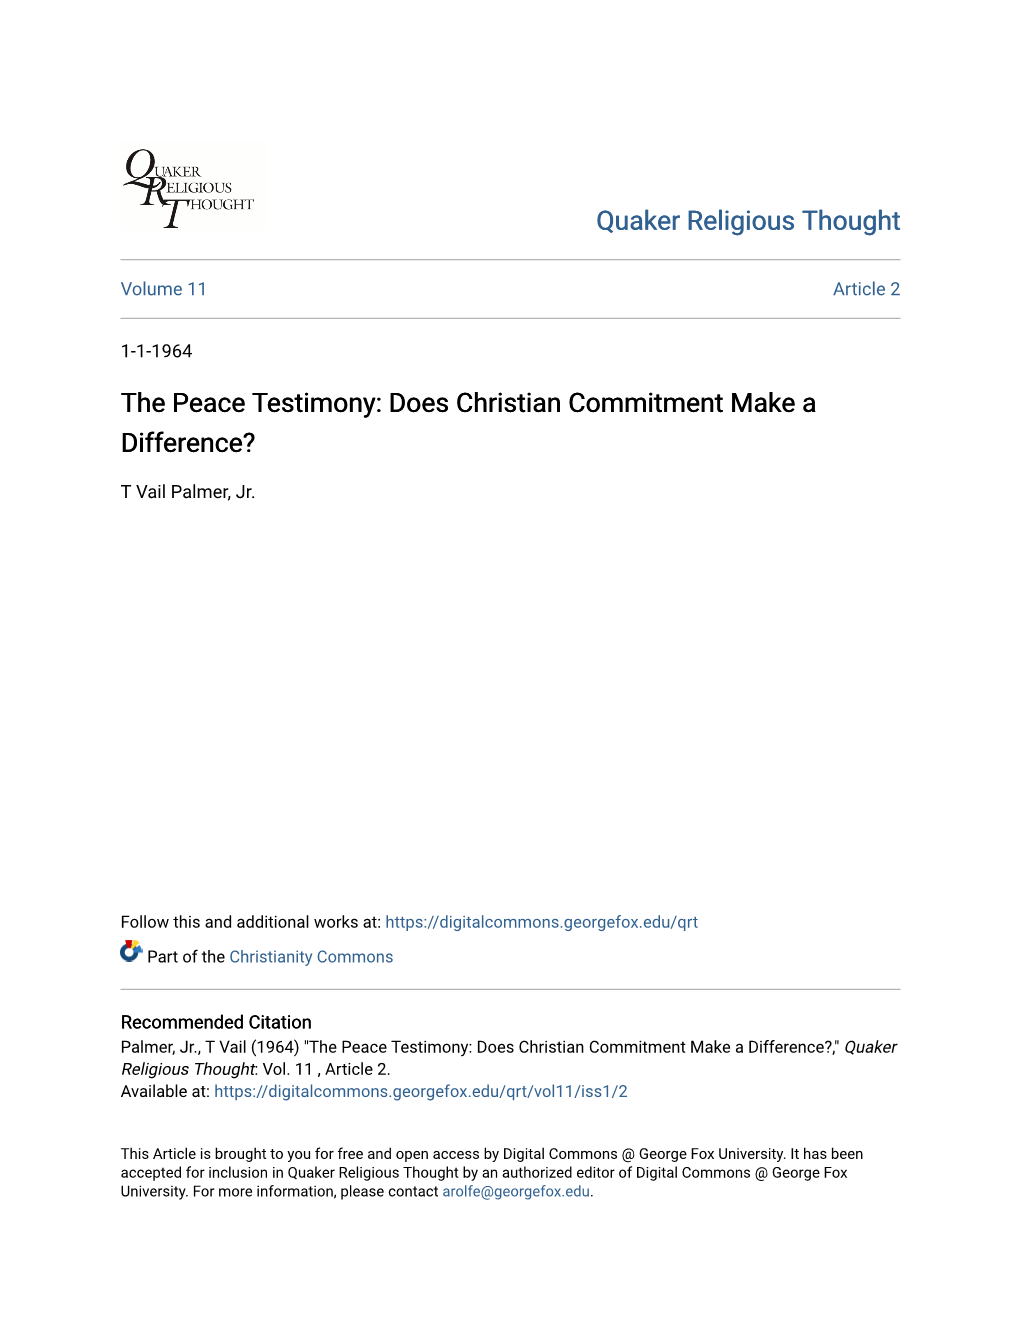 The Peace Testimony: Does Christian Commitment Make a Difference?